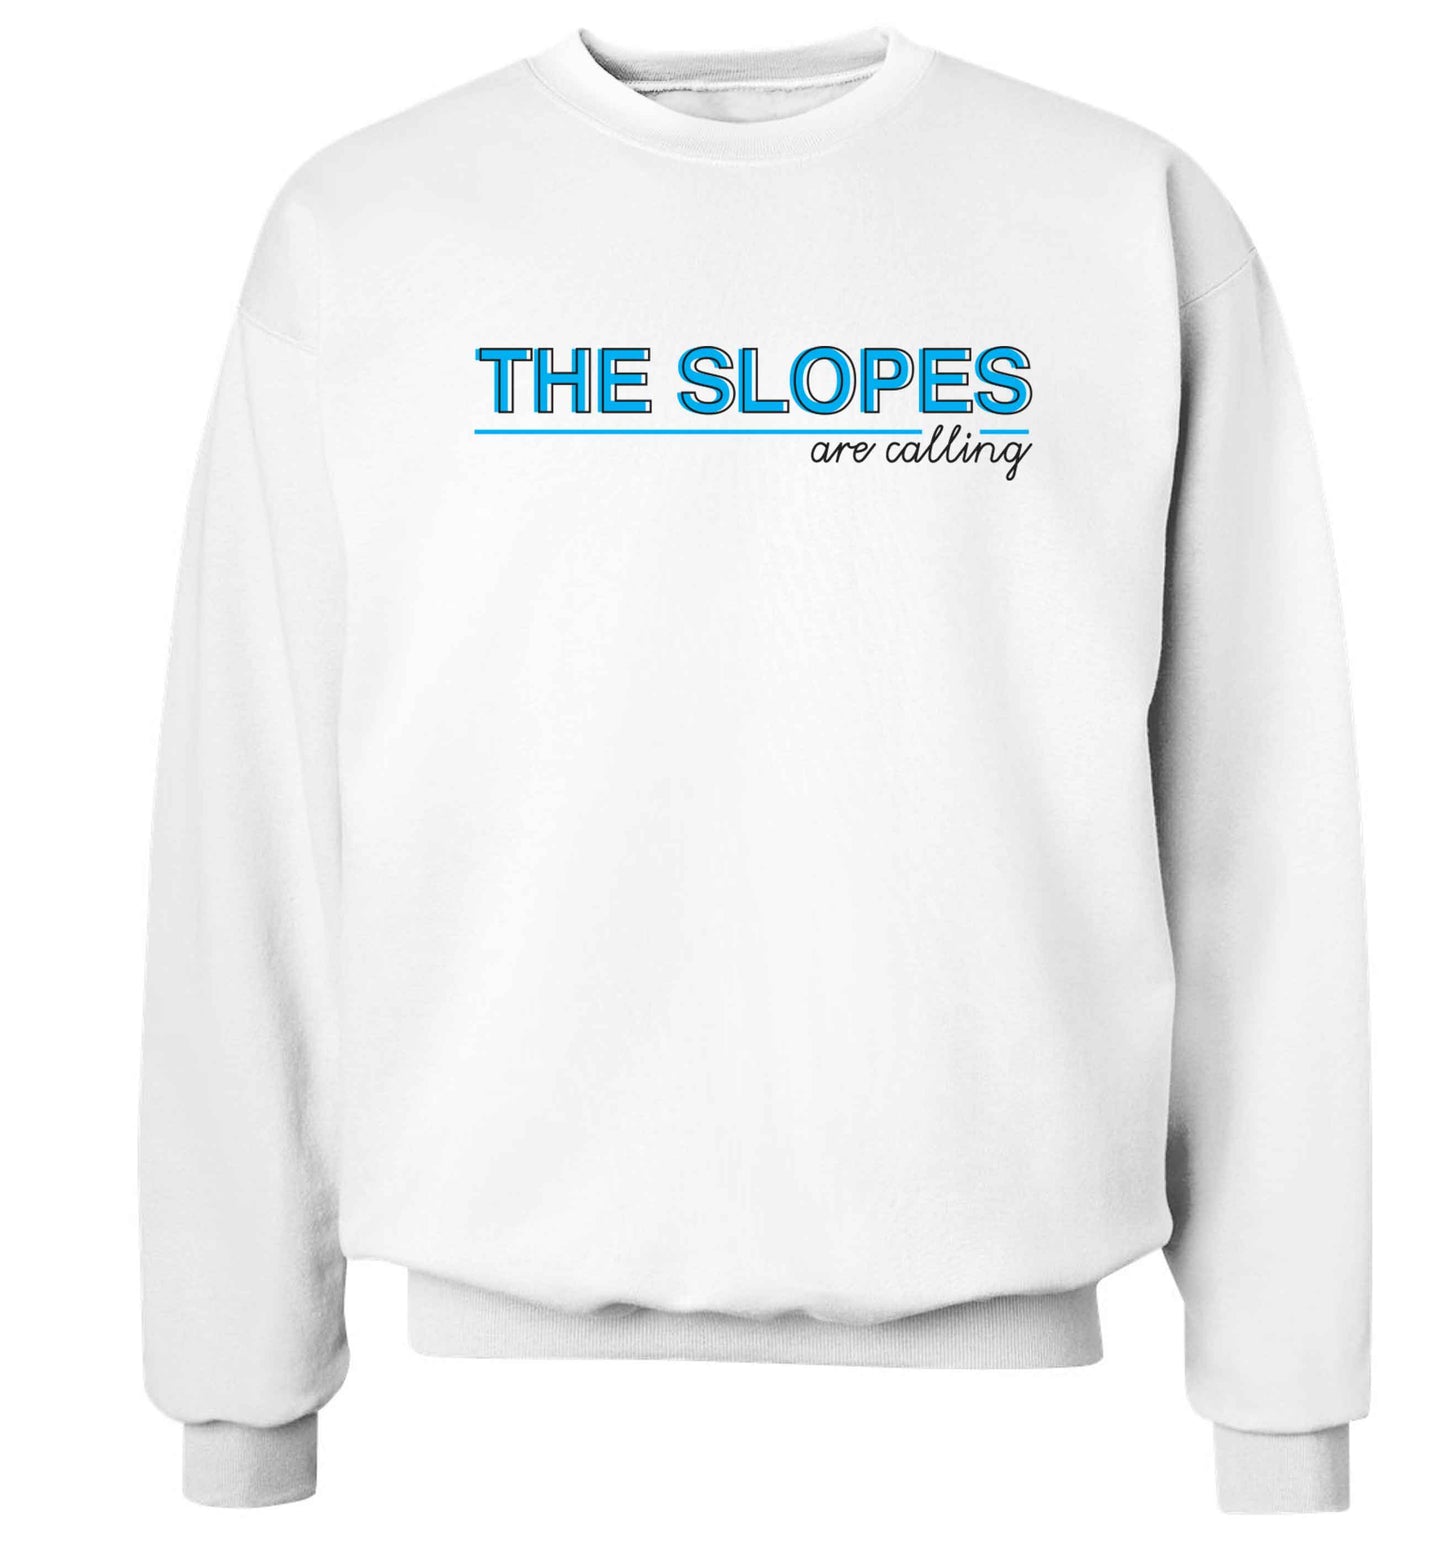 The slopes are calling Adult's unisex white Sweater 2XL